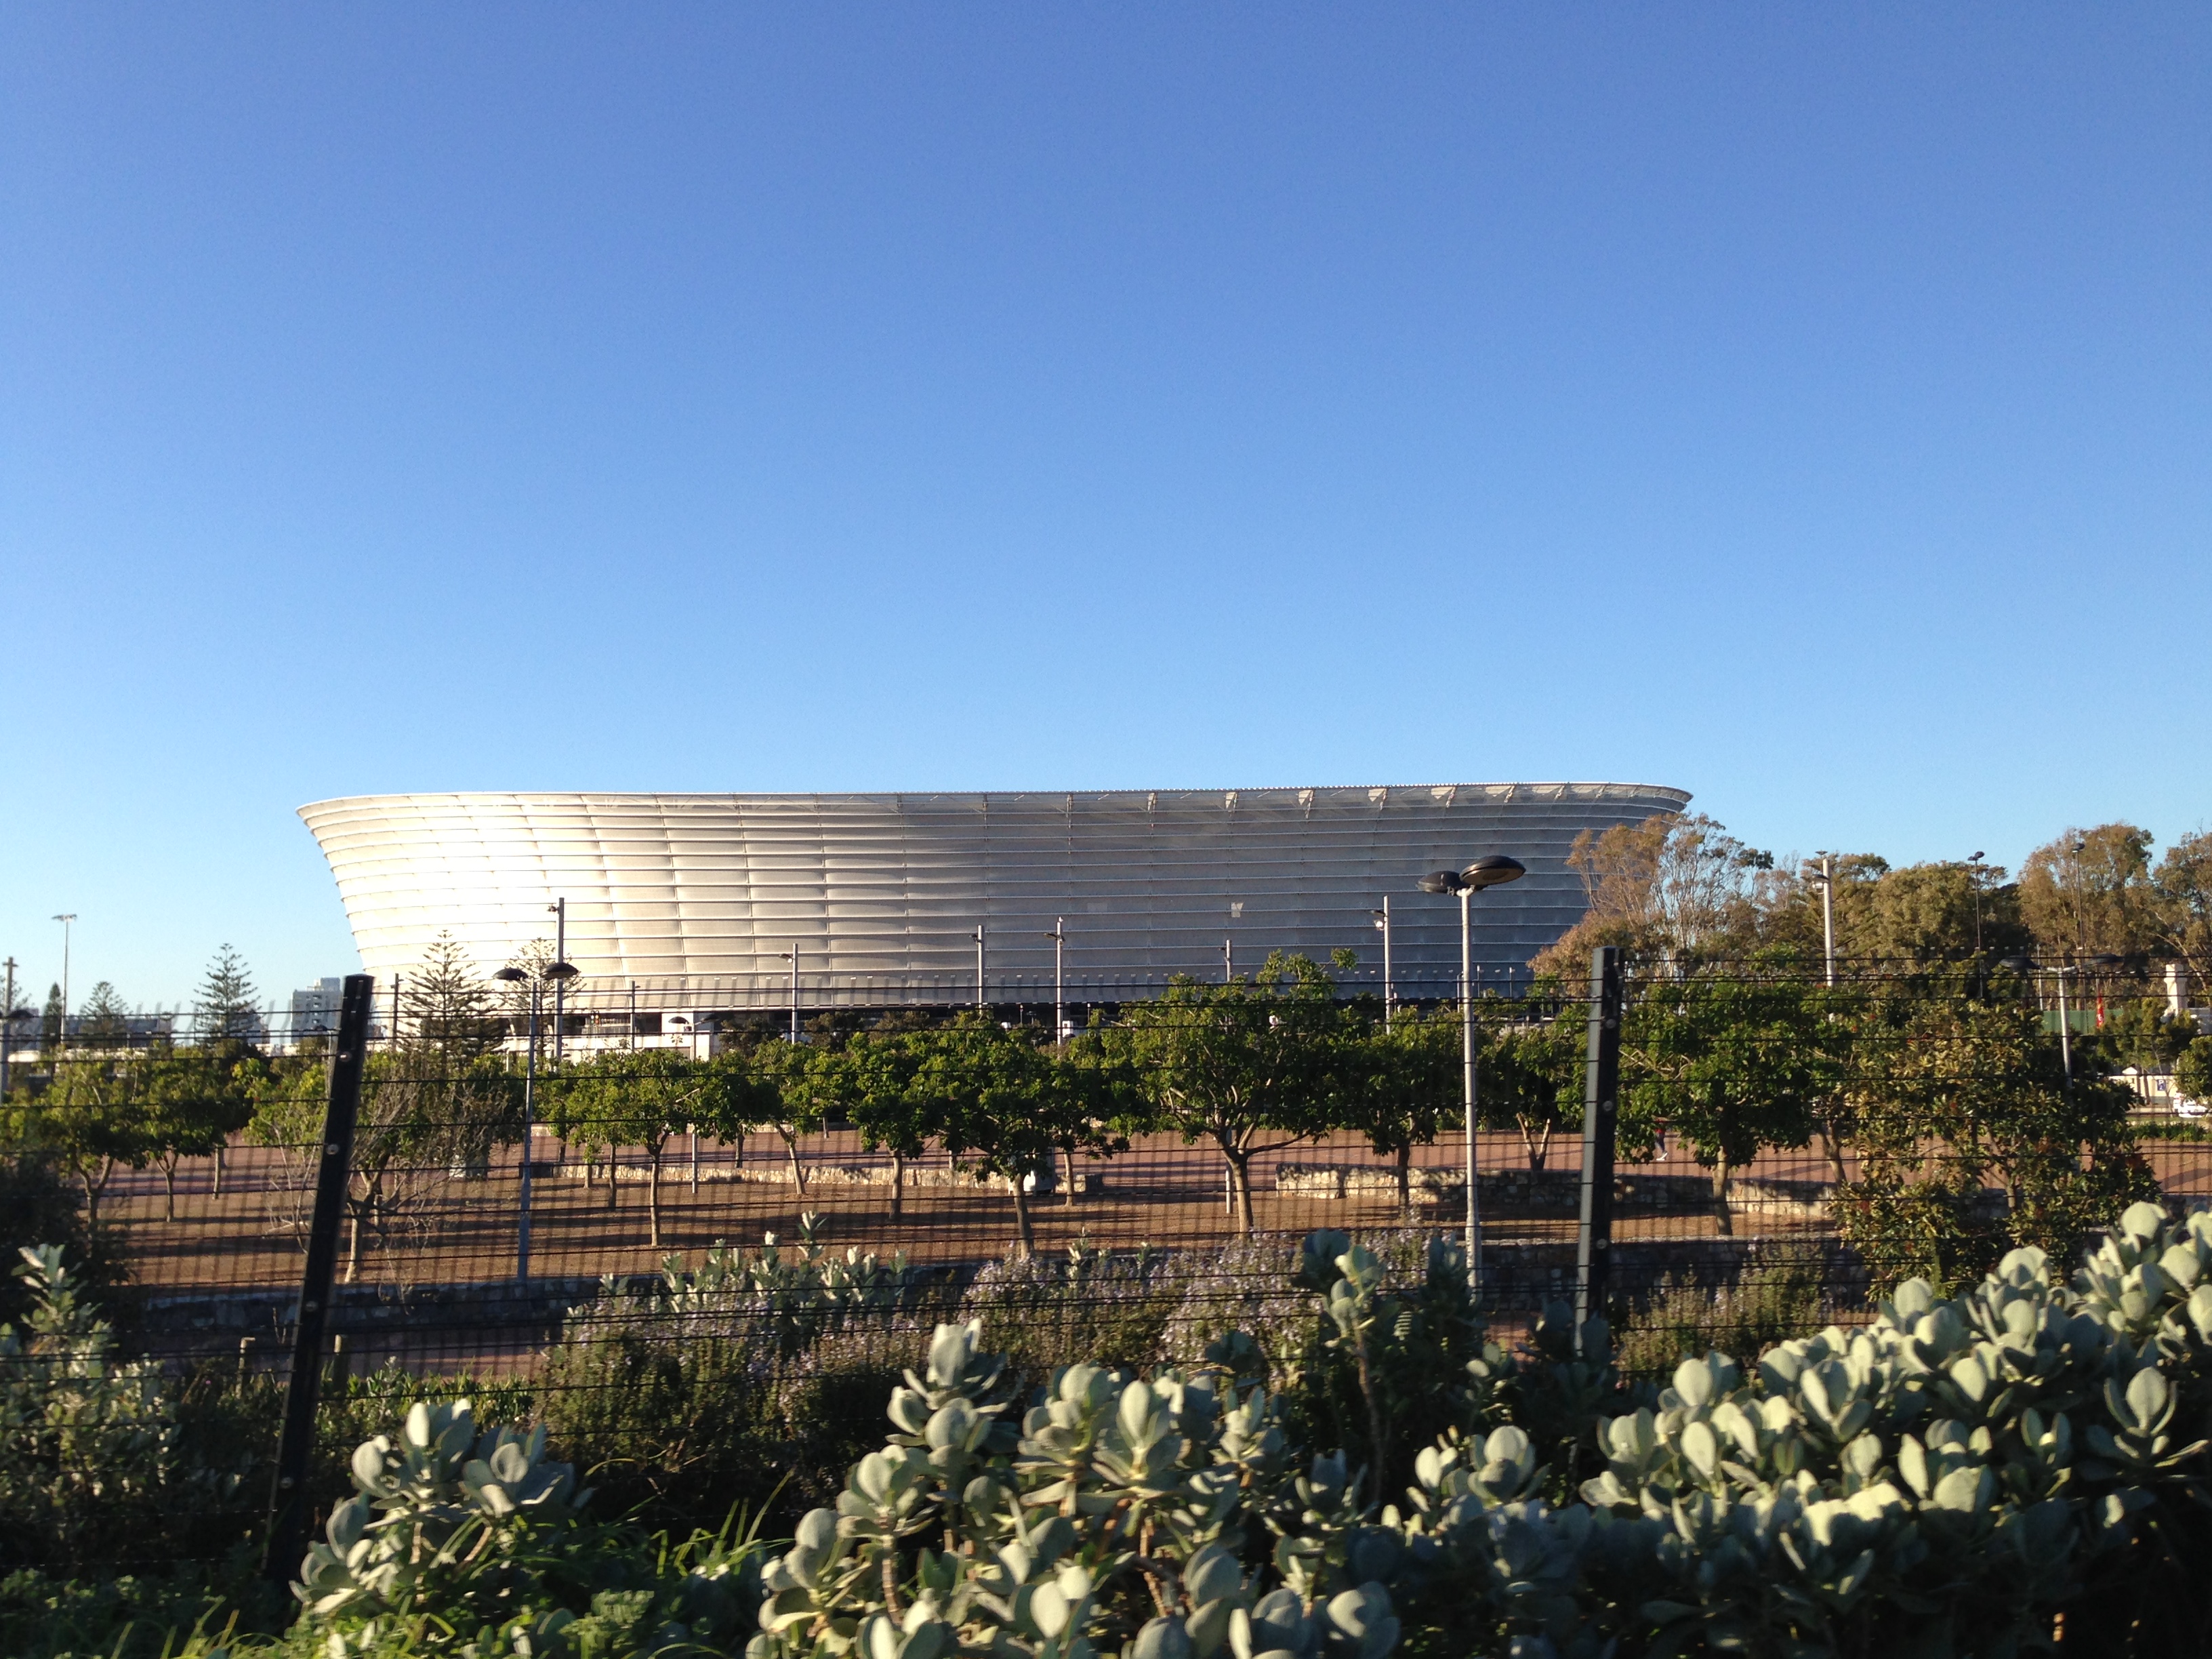 Not for rugby, but Cape Town's Football (soccer) stadium is beautiful!